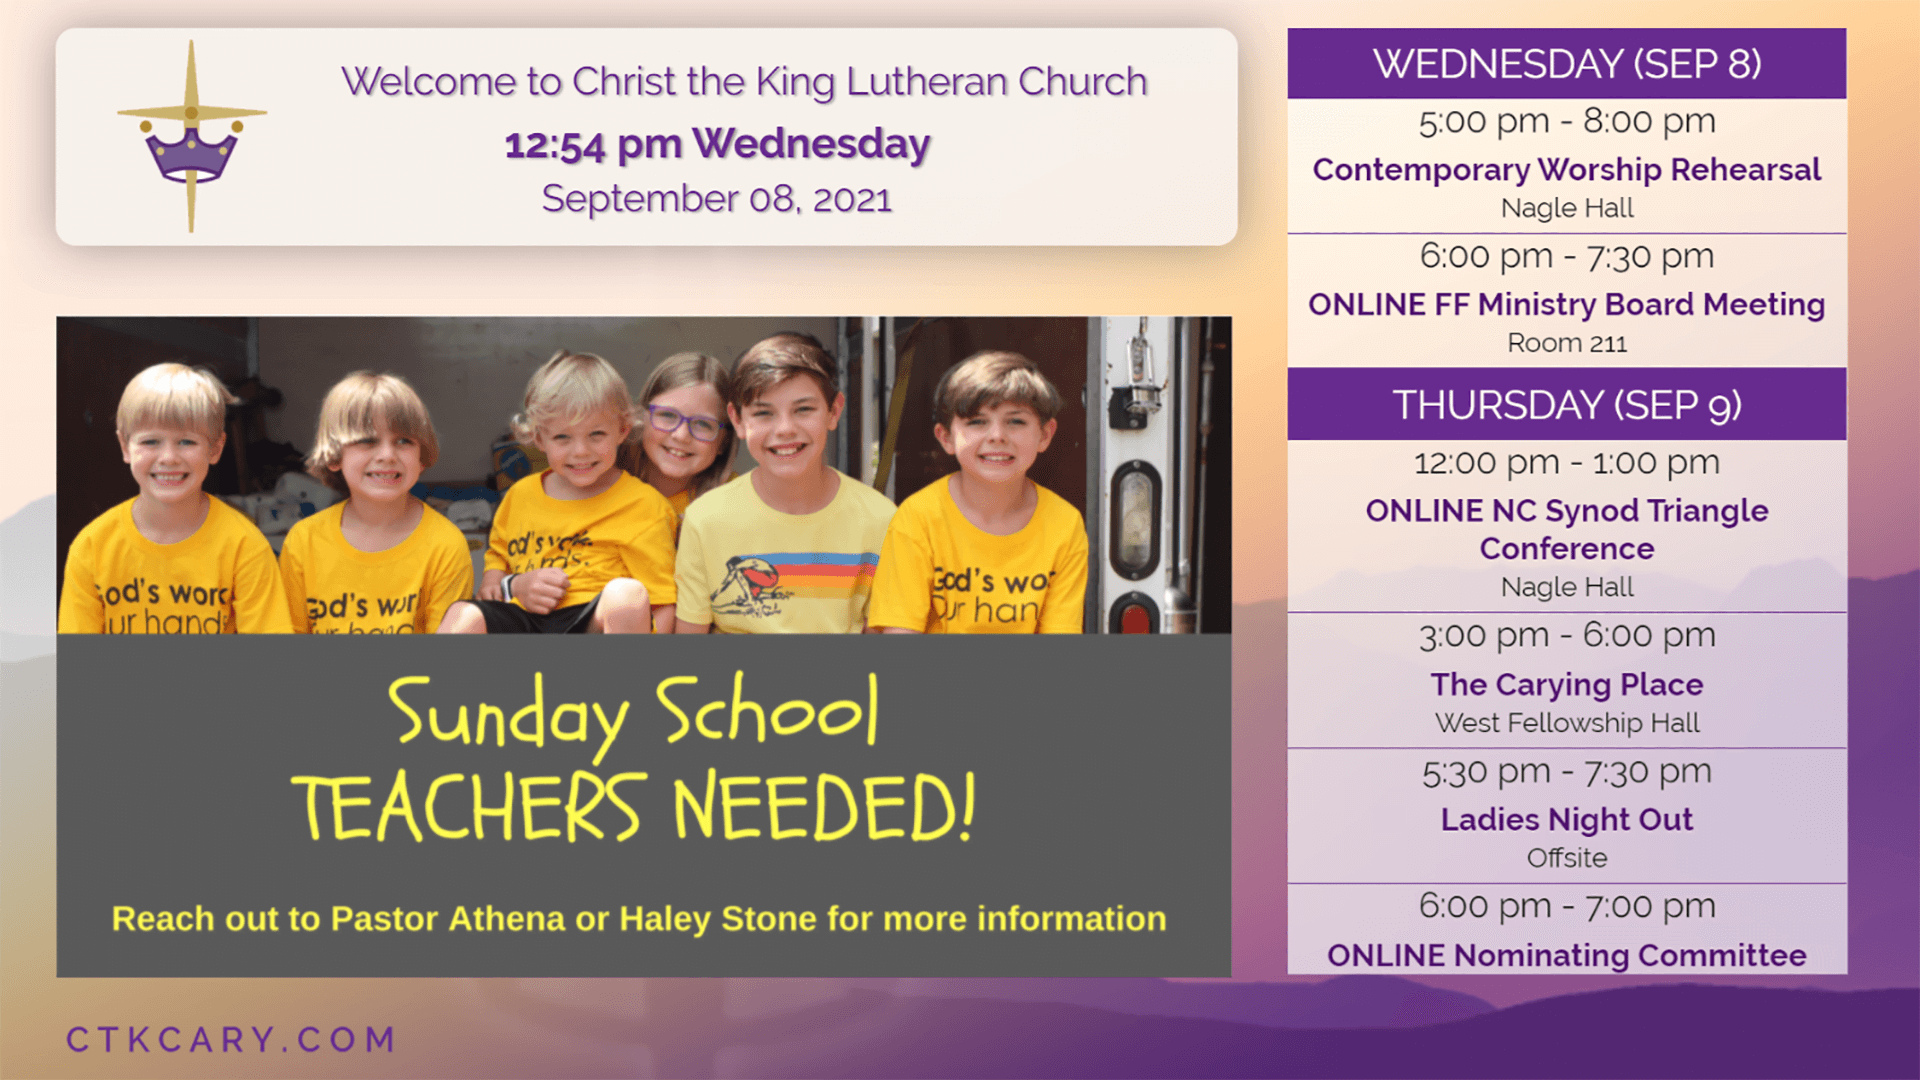 Purple digital signage displaying schedules, announcements, and welcome messaging for Christ the King Lutheran Church